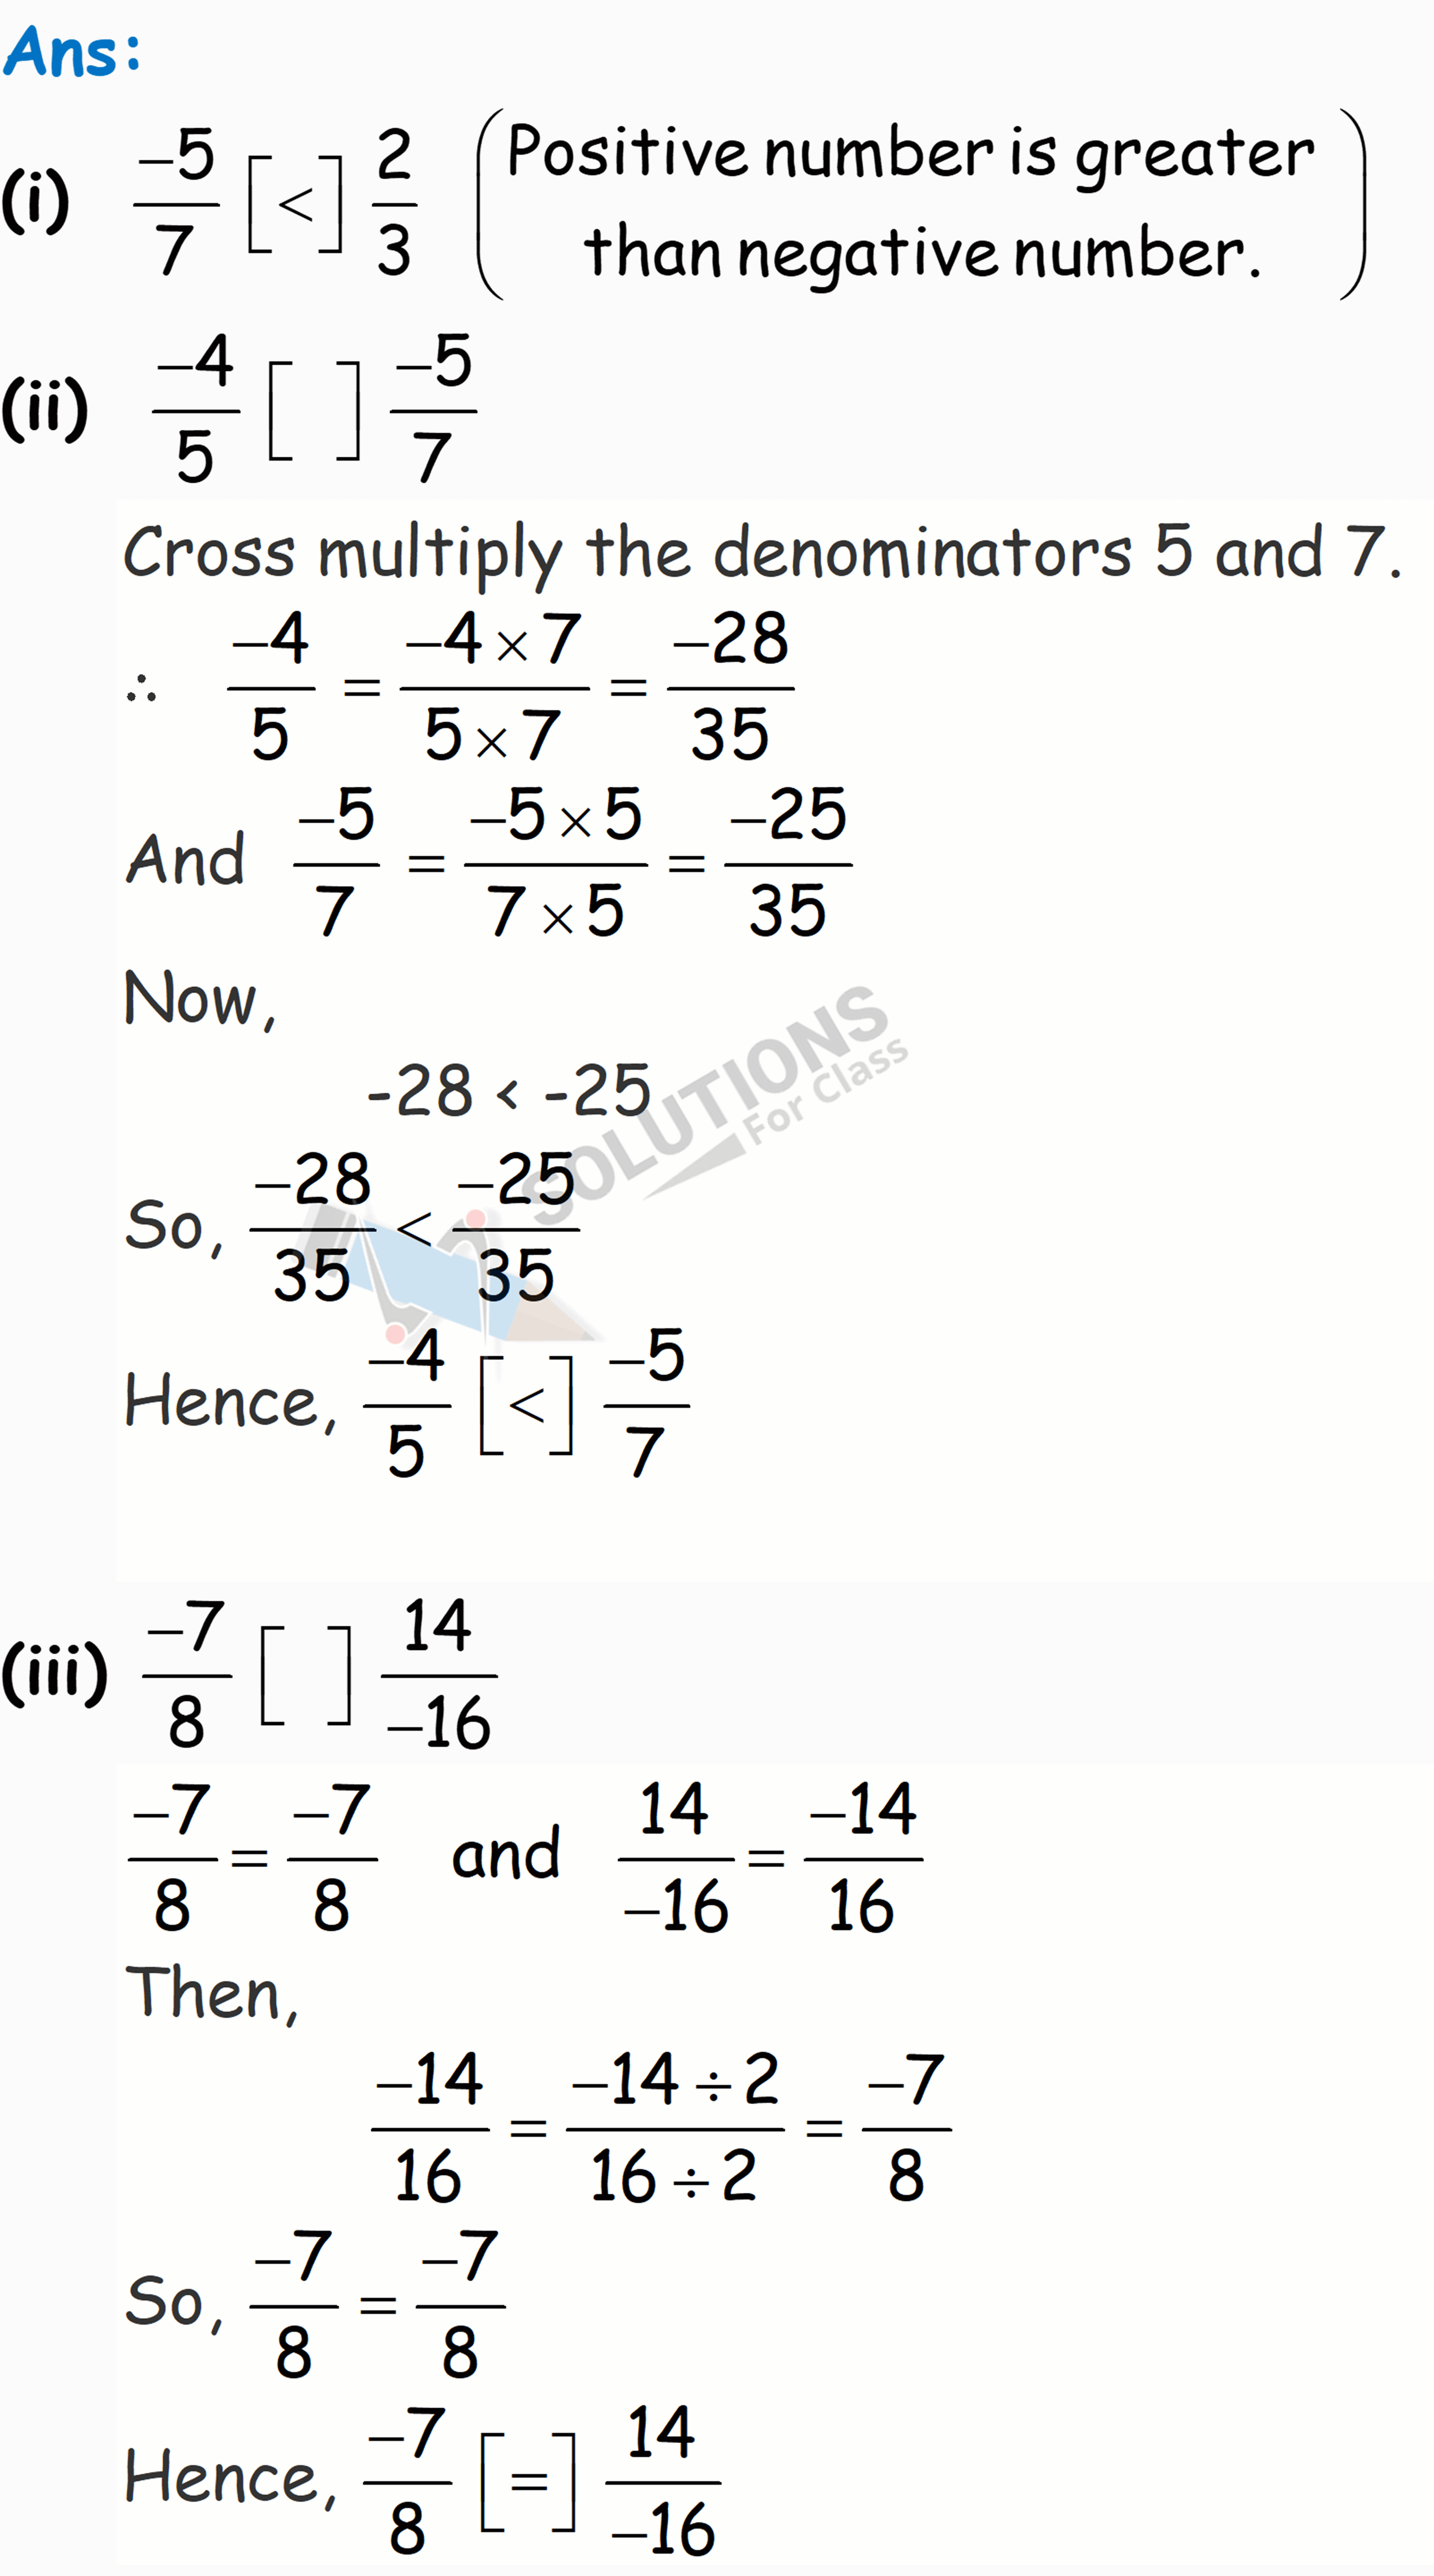 NCERT Solutions For Class 7 Maths Chapter 9, Rational Numbers, Exercise 9.1 Q.8 (i to iii)